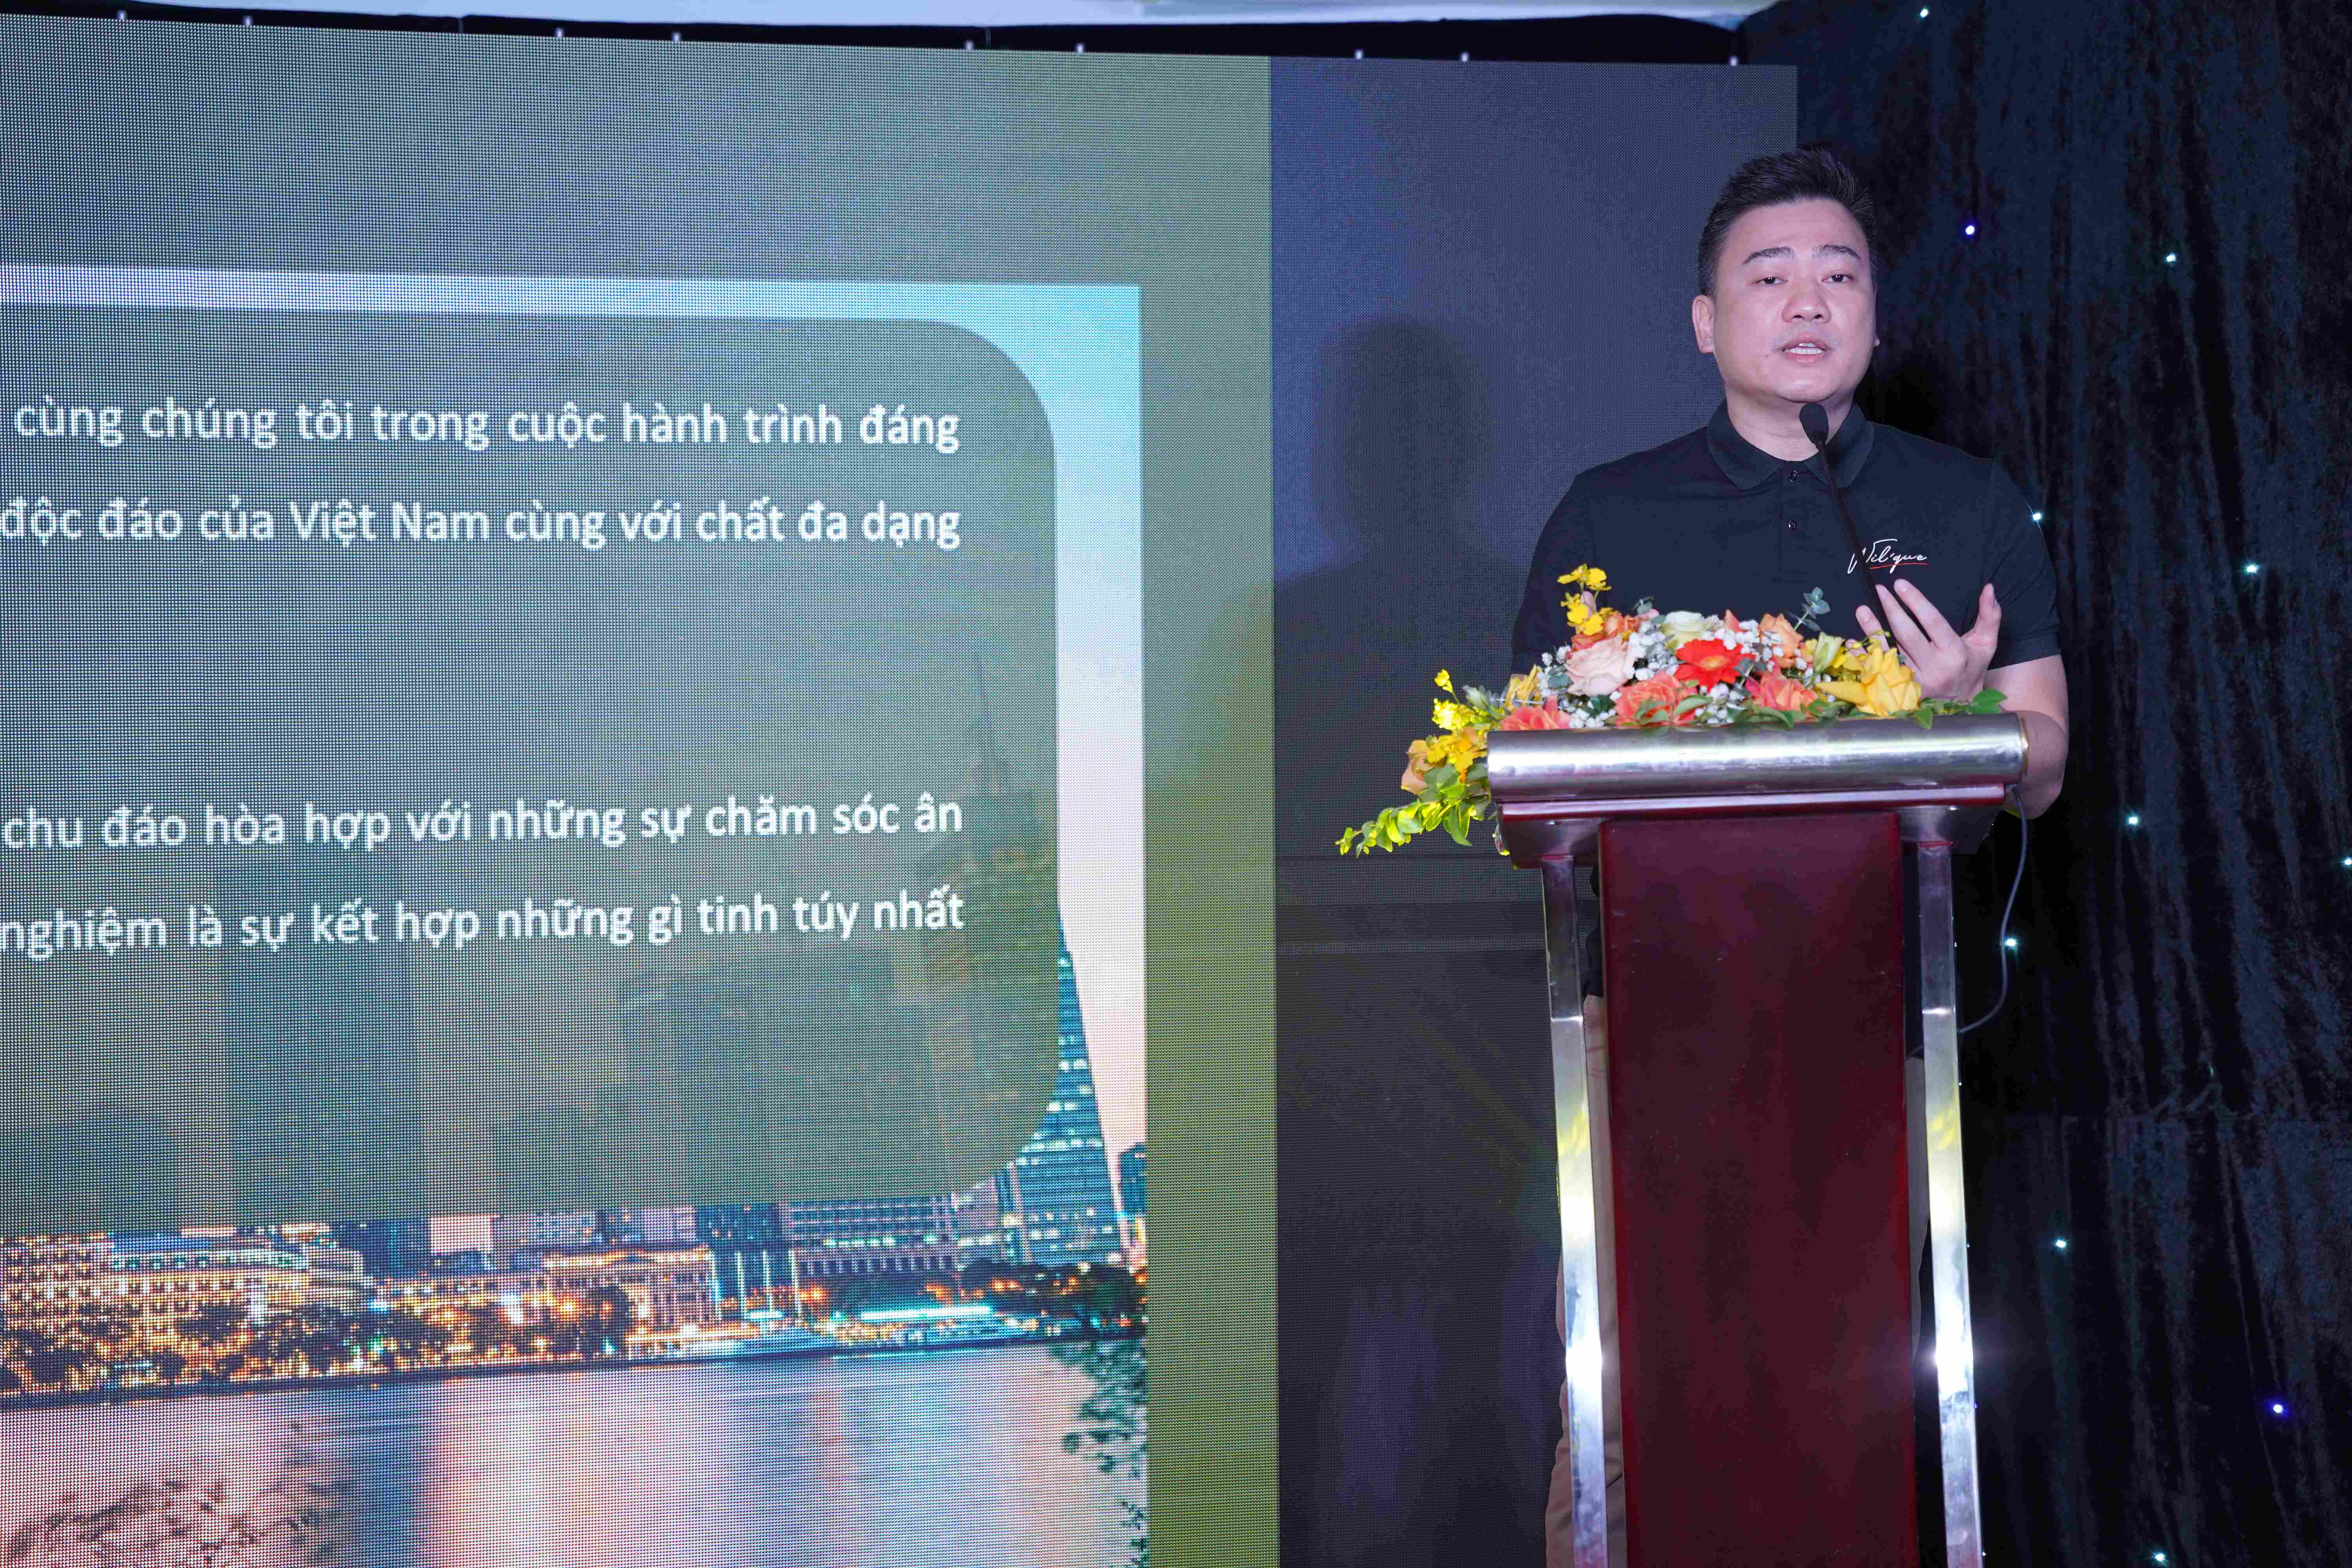 The Wil’que hotel brand is officially launched in the Vietnamese market